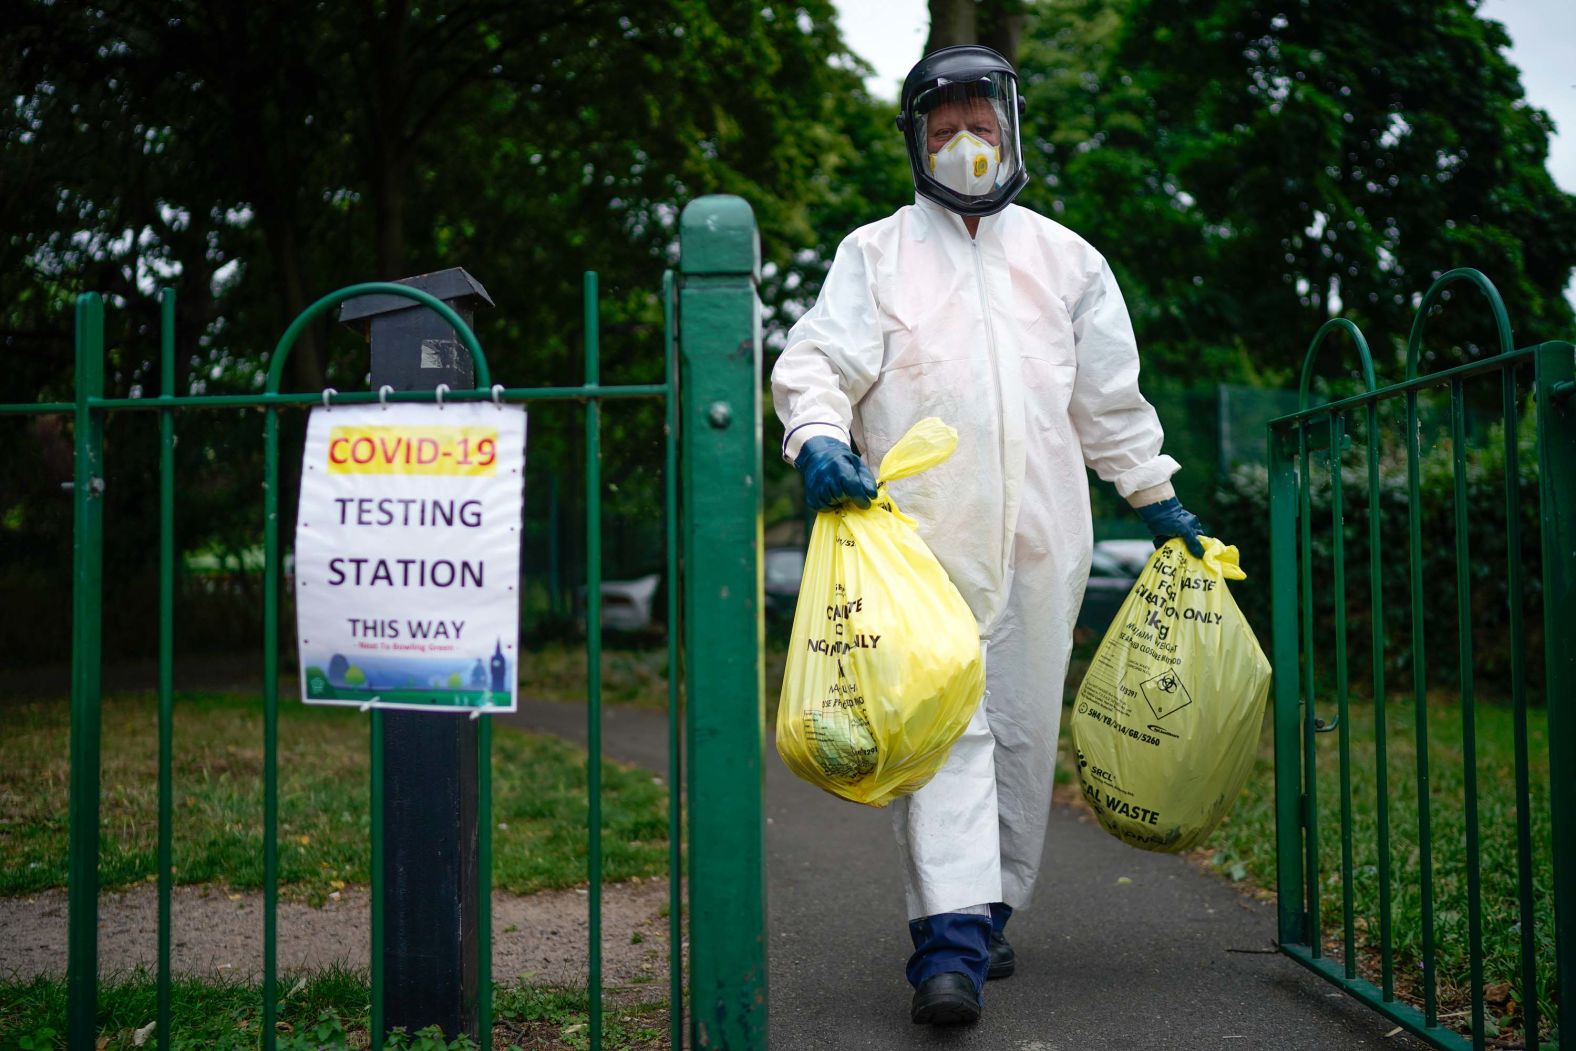 A city council worker carries trash from a coronavirus testing center in Leicester, England, on June 29. Schools and stores in the city of Leicester were closing again, with <a href="index.php?page=&url=https%3A%2F%2Fwww.cnn.com%2Fworld%2Flive-news%2Fcoronavirus-pandemic-06-30-20-intl%2Fh_64a41a8d1320704c23448d991d0492d2" target="_blank">some restrictions being reimposed</a> because of its high infection rate.